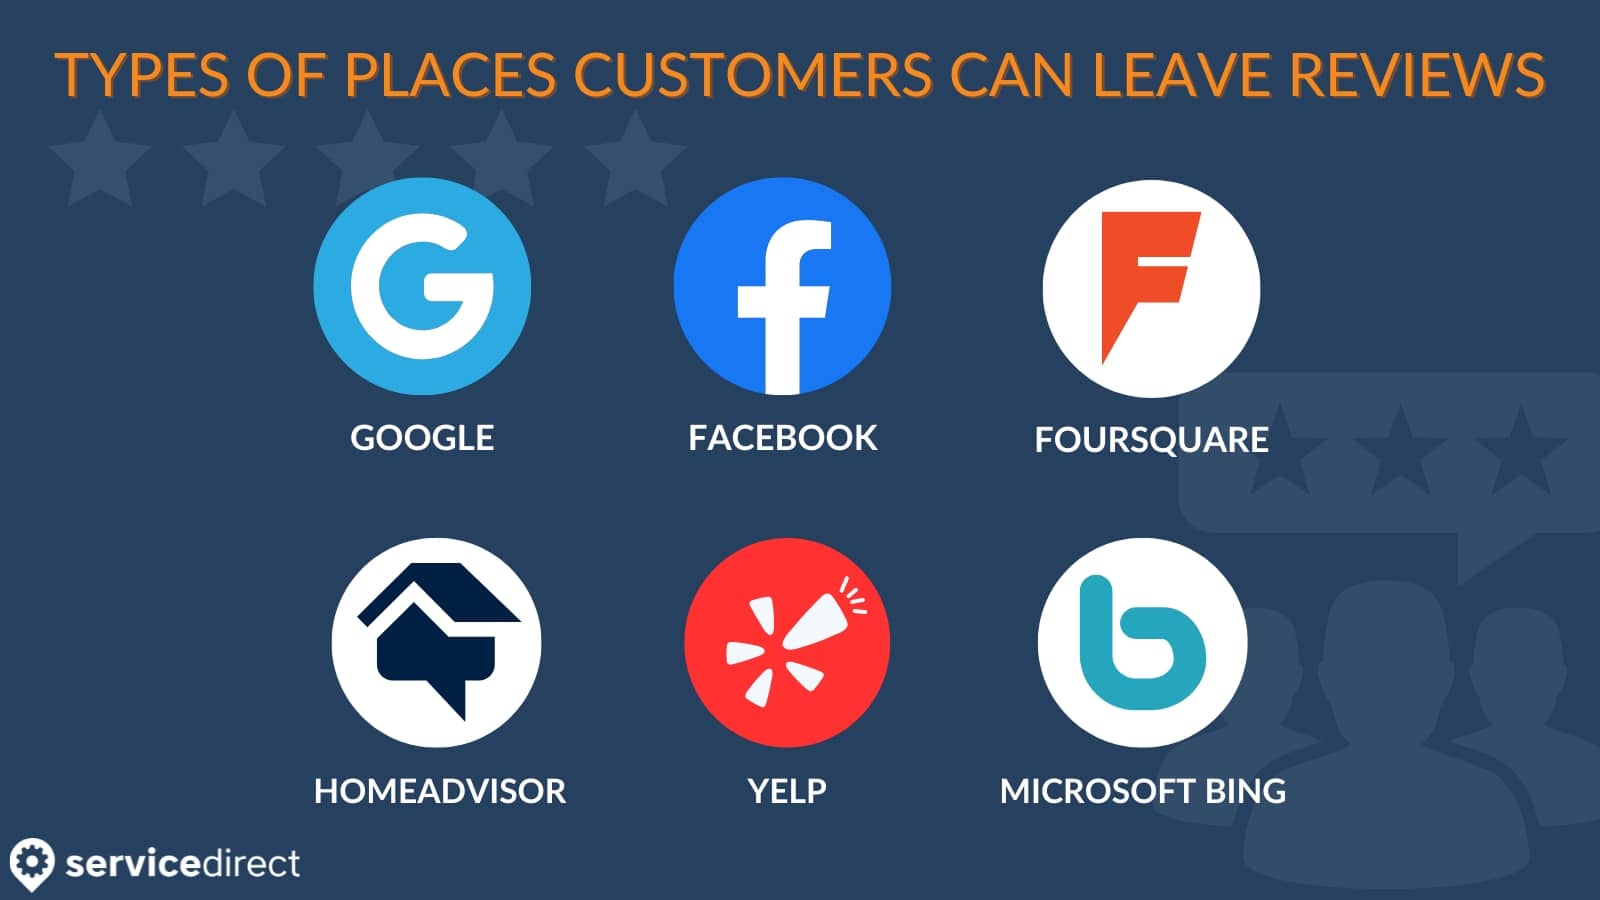 Customers can leave reviews on Google, Facebook, Yelp, Bing, and more. 